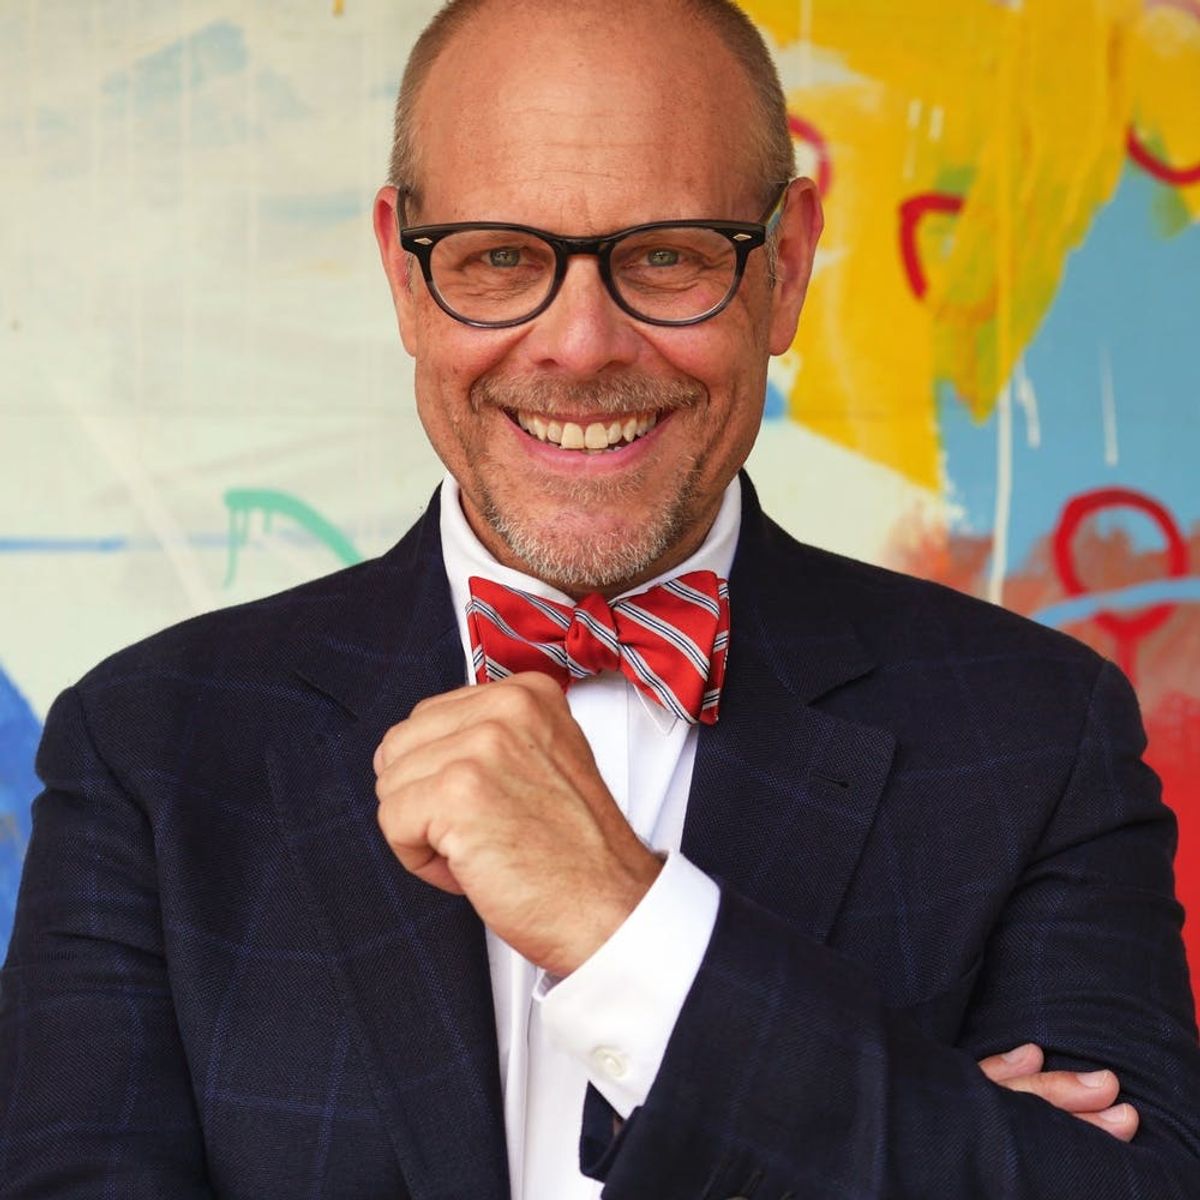 Alton Brown Reveals the ‘Good Eats’ Recipes He’s Revamping